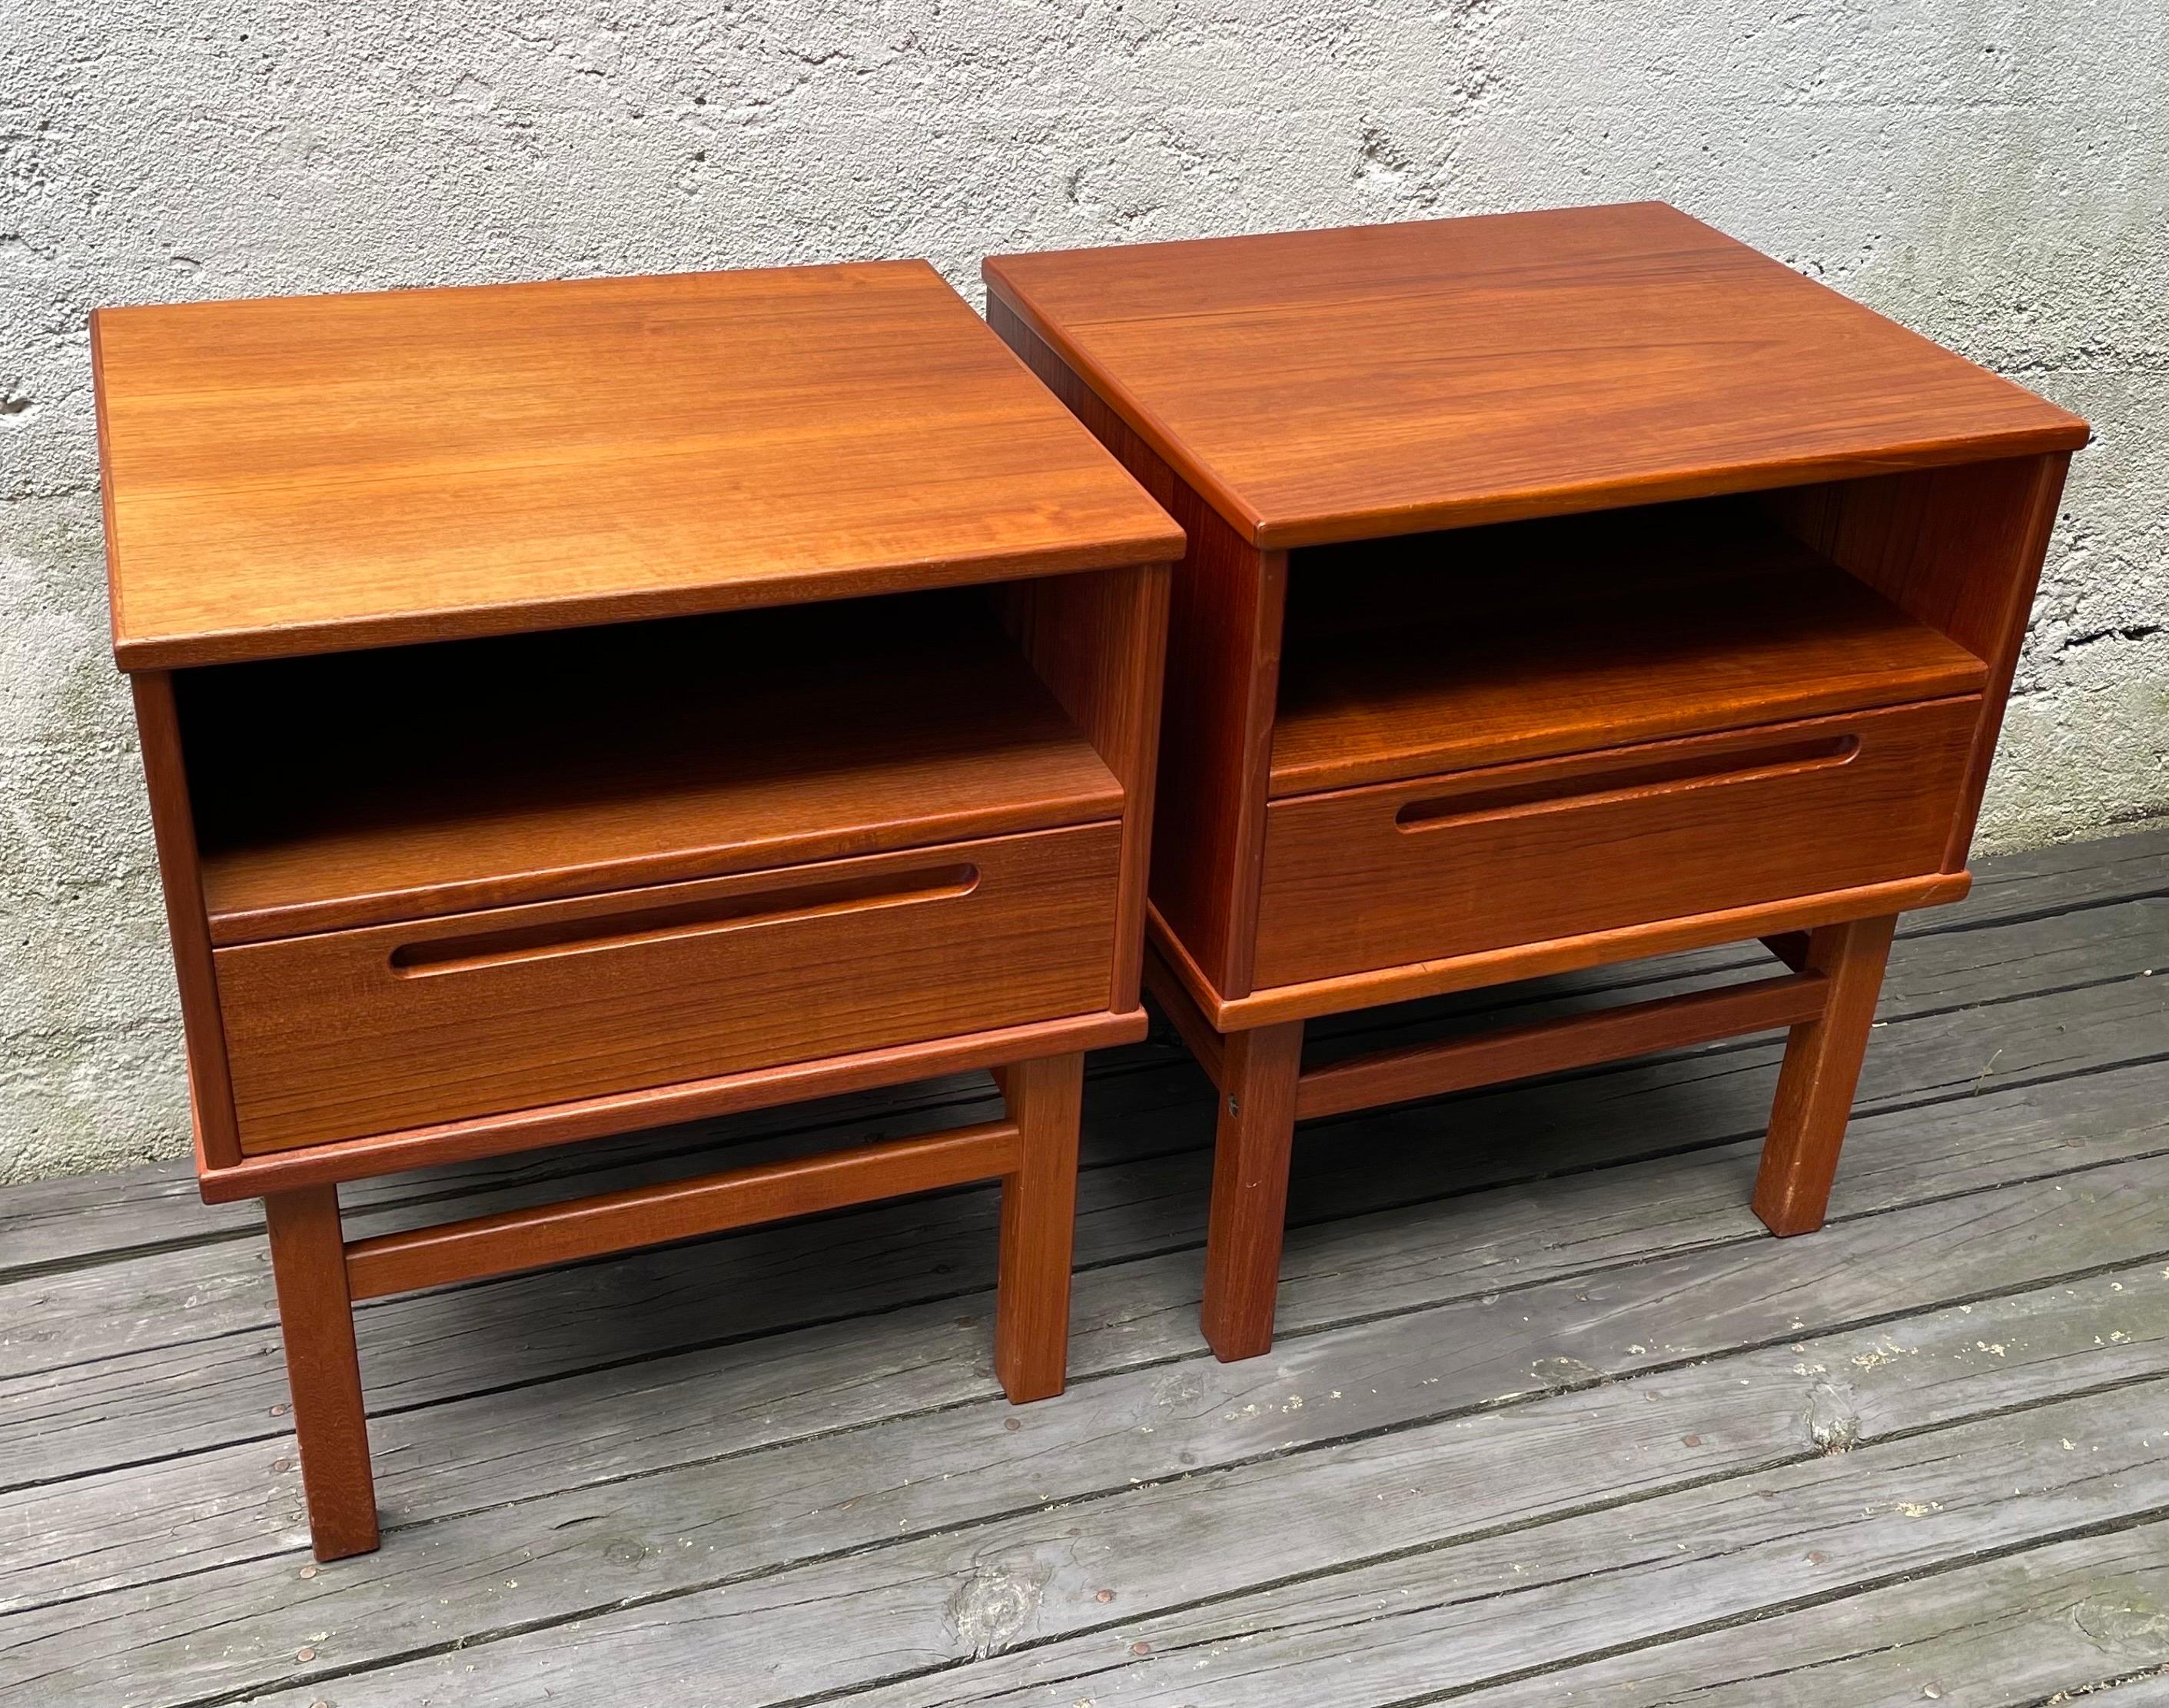 Beautiful pair of Mid Century teak night stands or side tables from Denmark. One drawer and one open shelf storage.